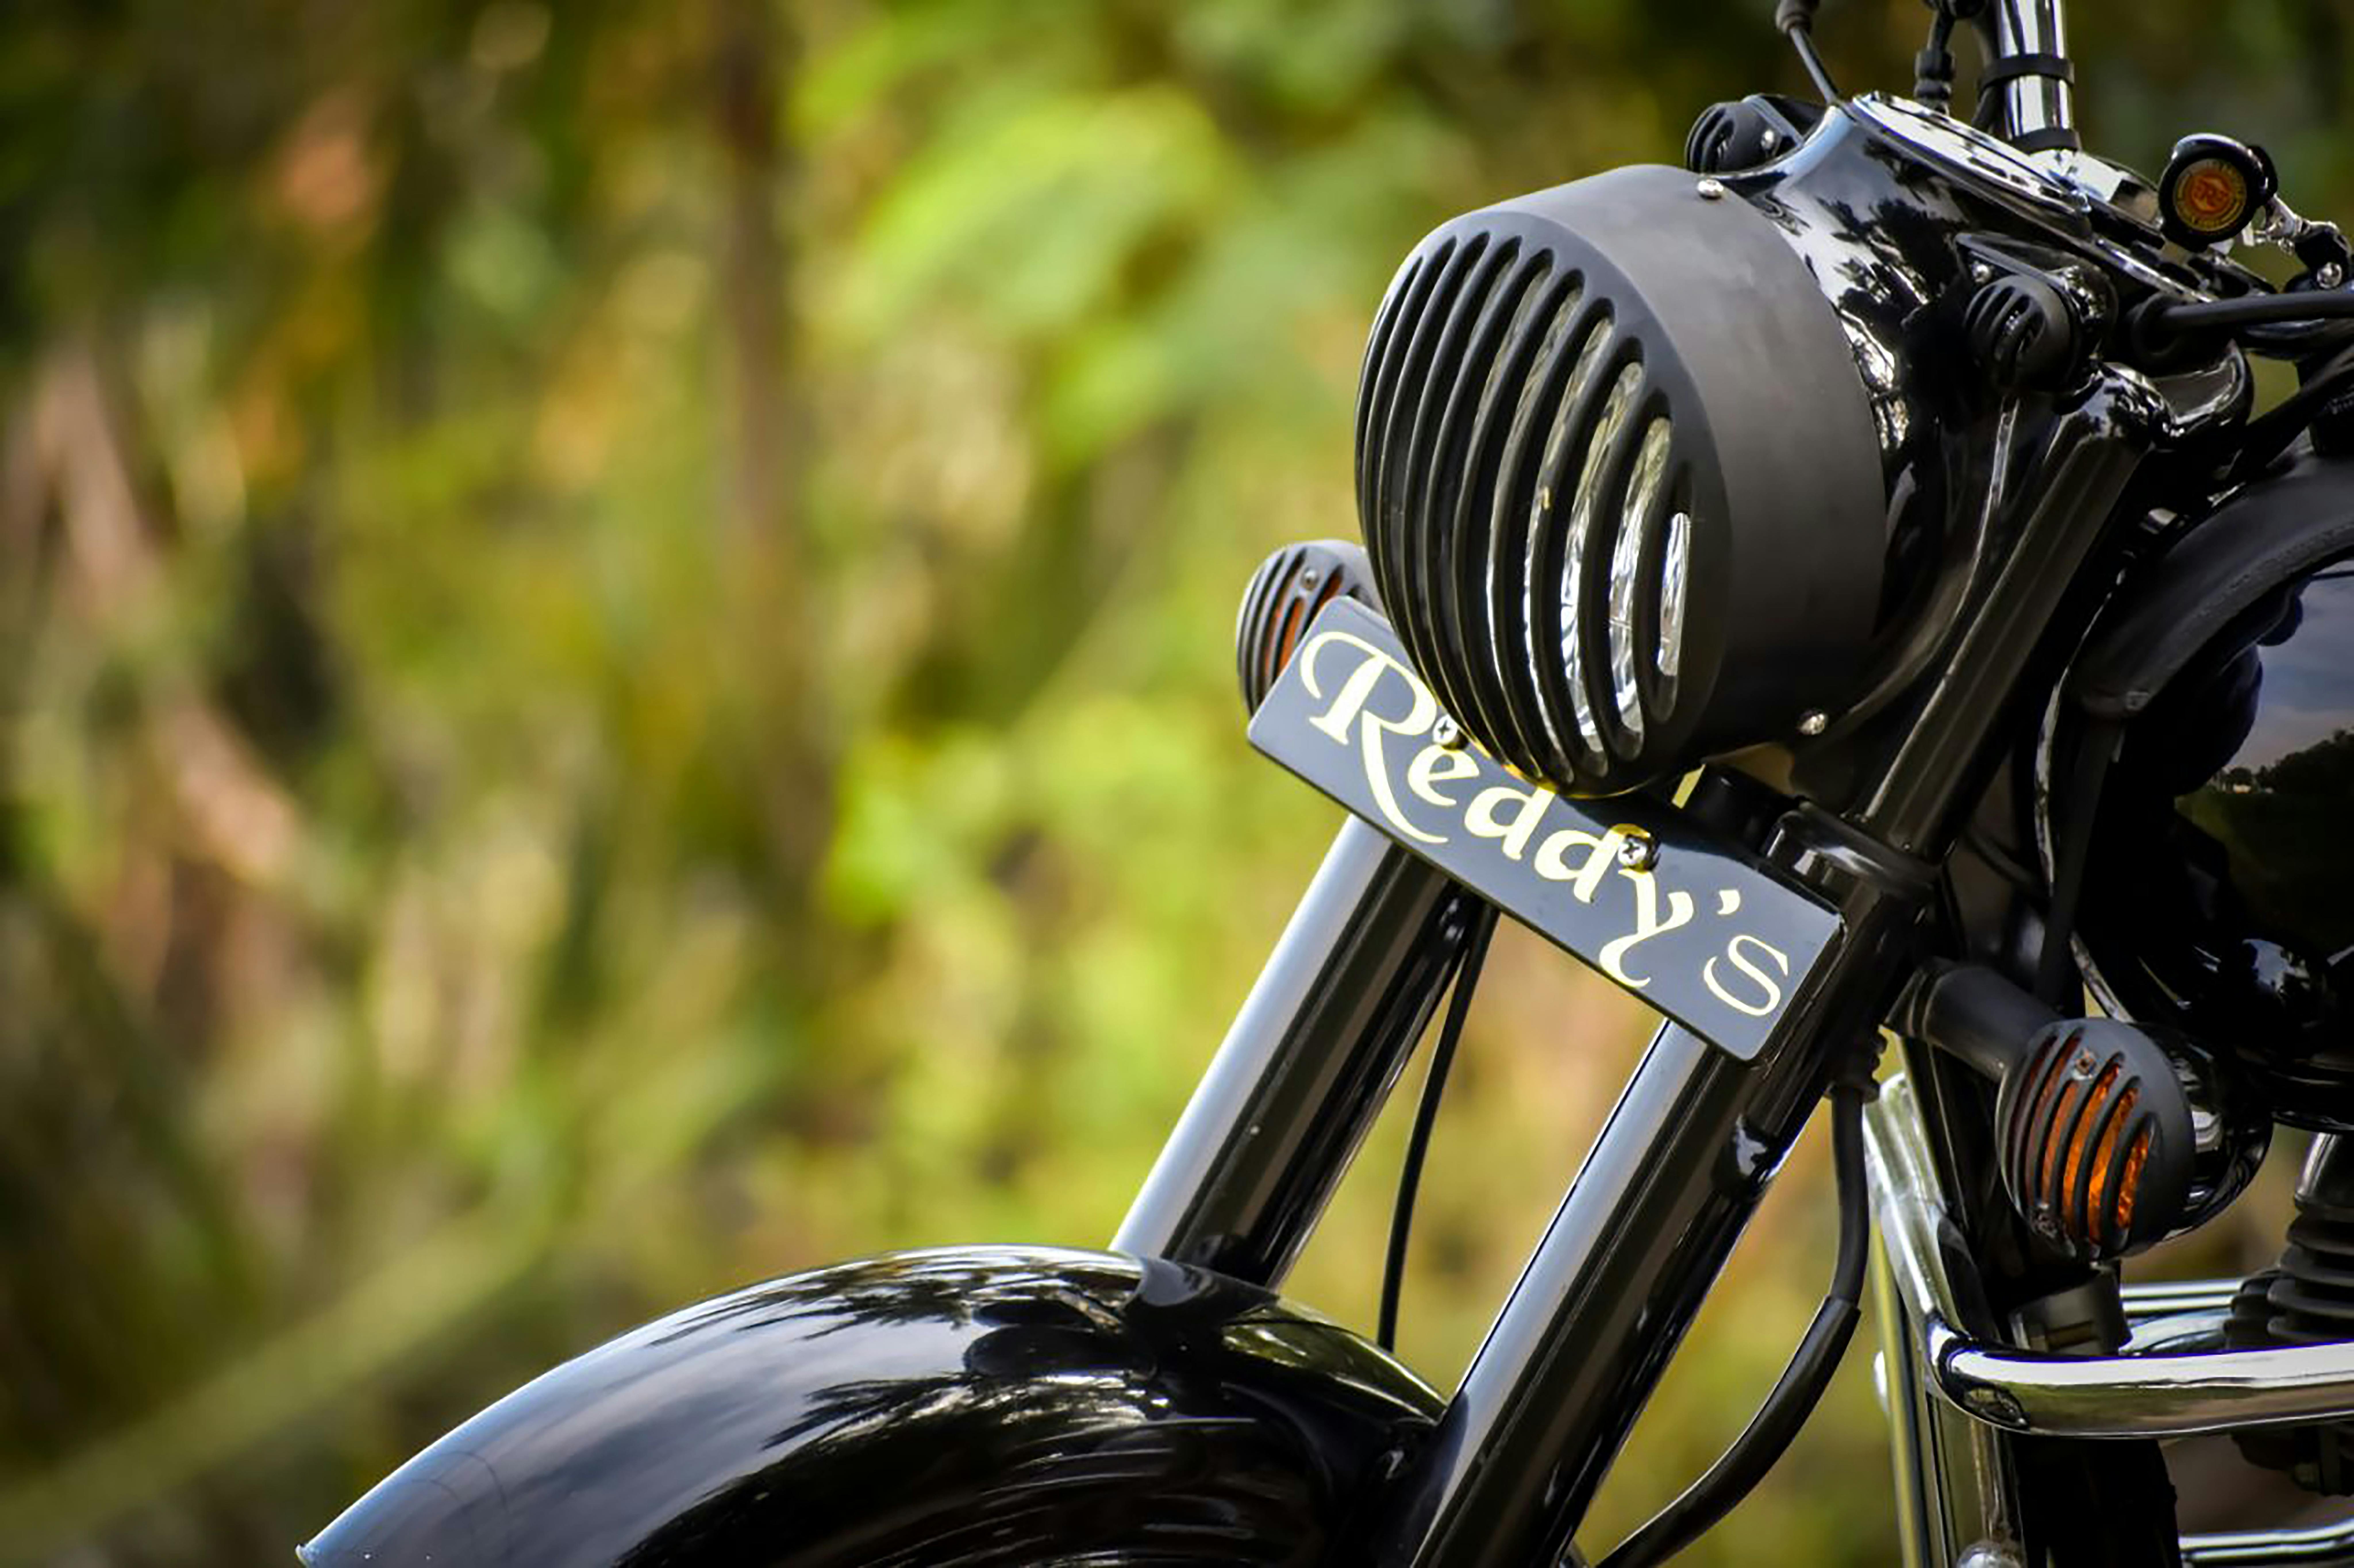 Royal Enfield Photos, Download The BEST Free Royal Enfield Stock Photos & HD  Images